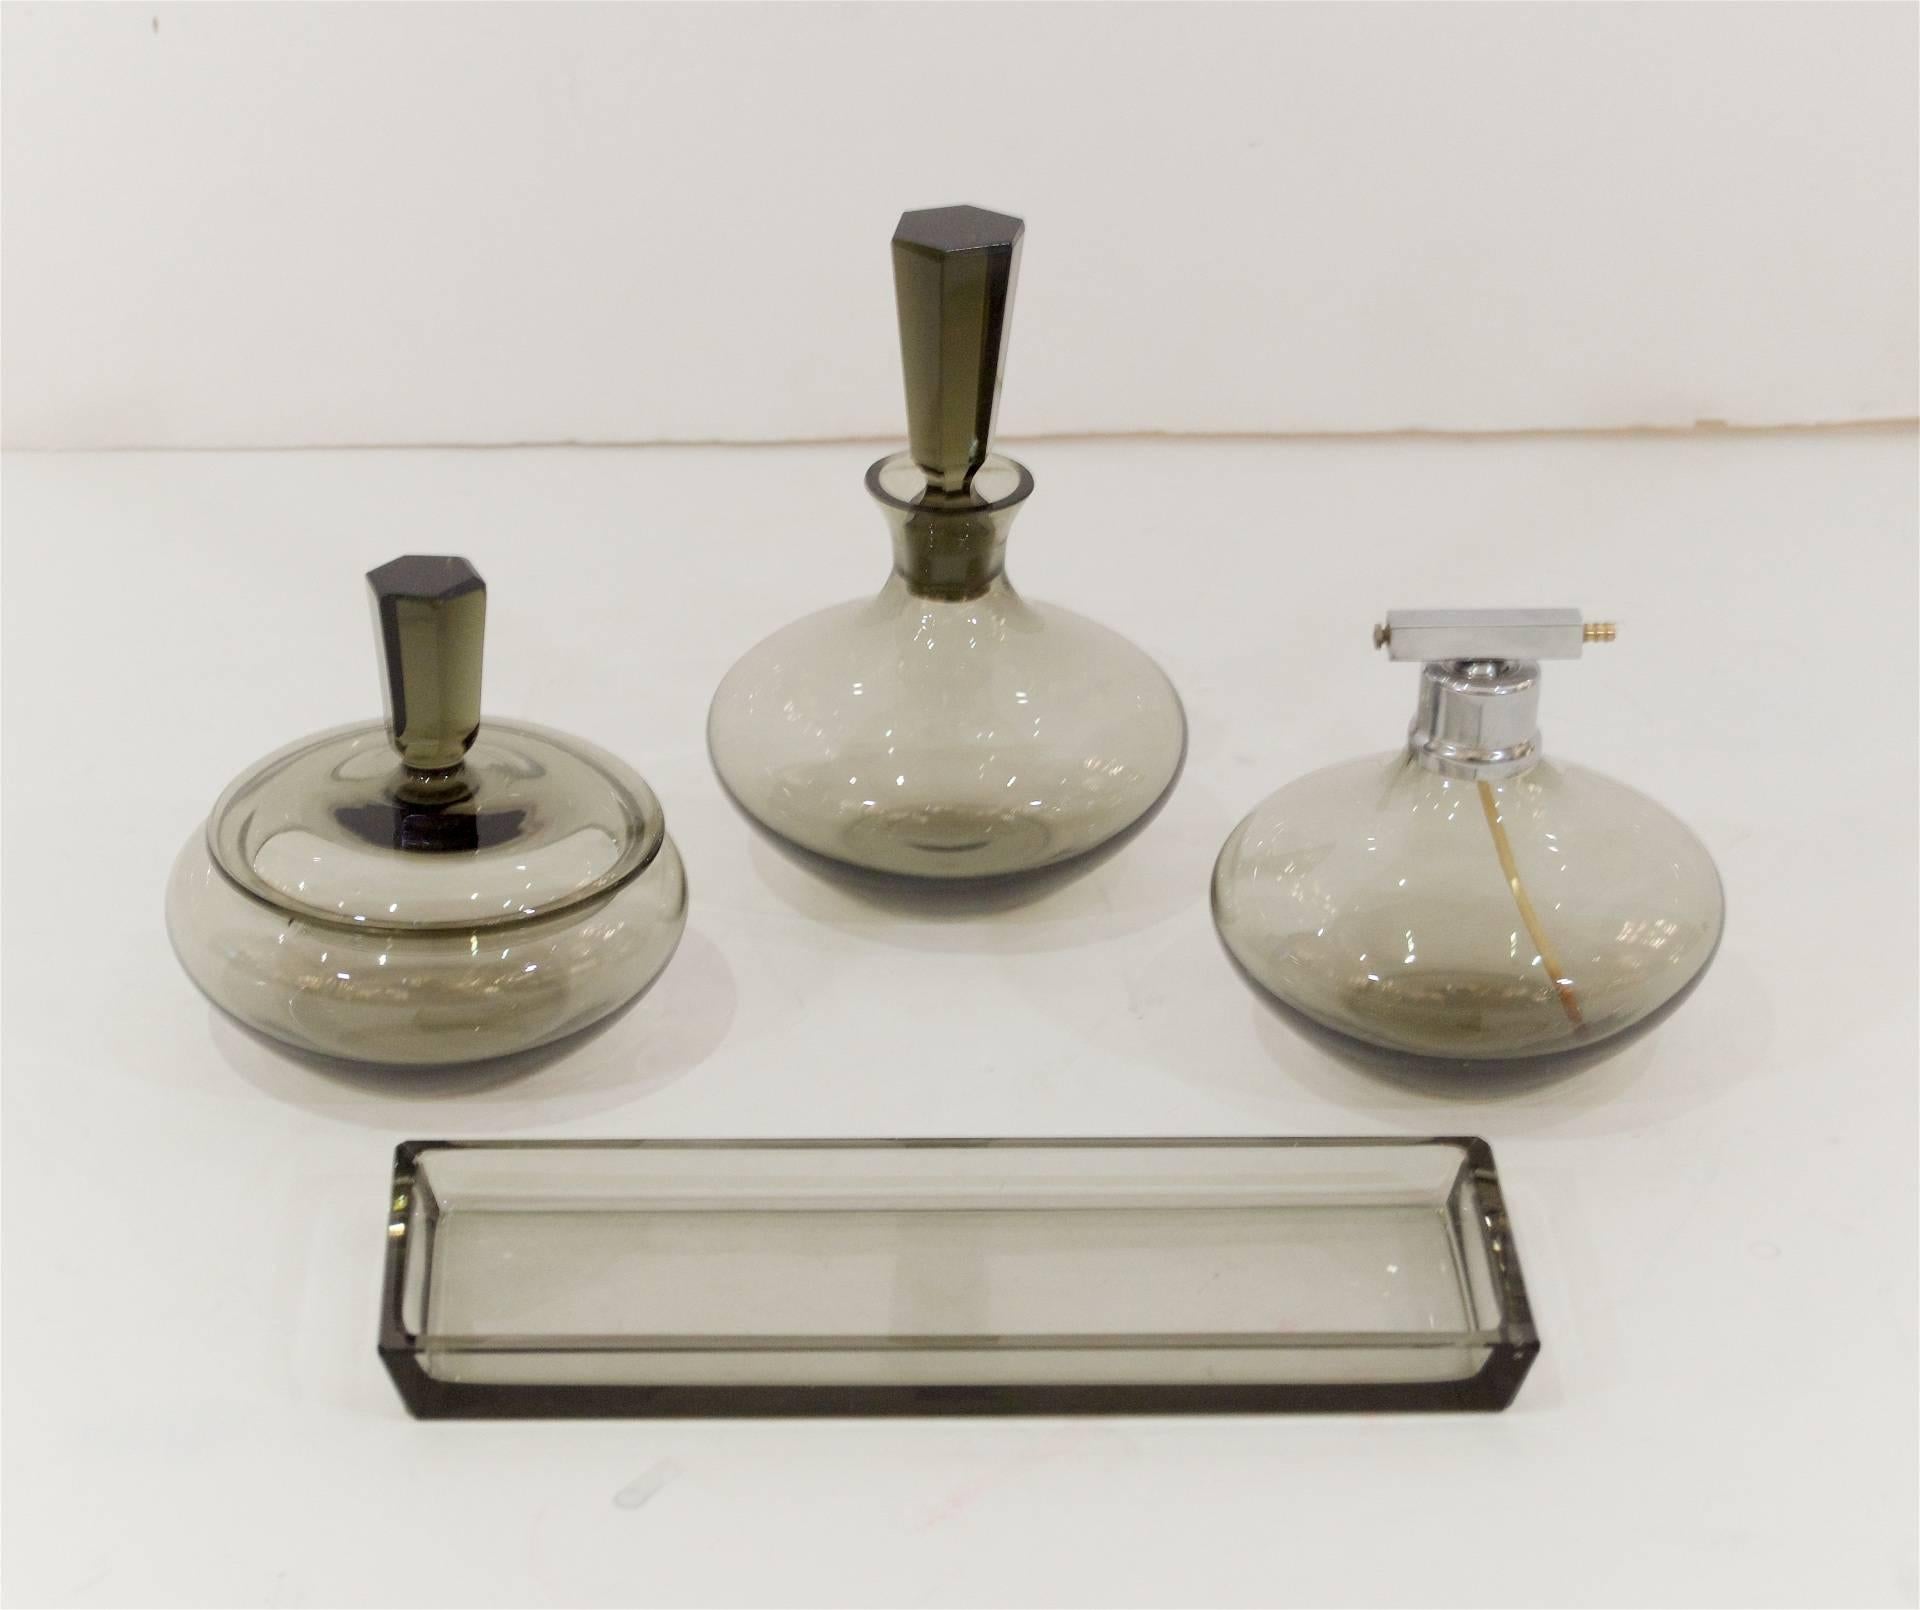 Art Deco smoke tone crystal vanity set. 

Includes perfume bottle, eau de cologne bottle, powder dish and trinket tray. 

Dimensions listed are of eau de cologne bottle.

Please note the perfume bottle is lacking atomizer bulb - due to the age